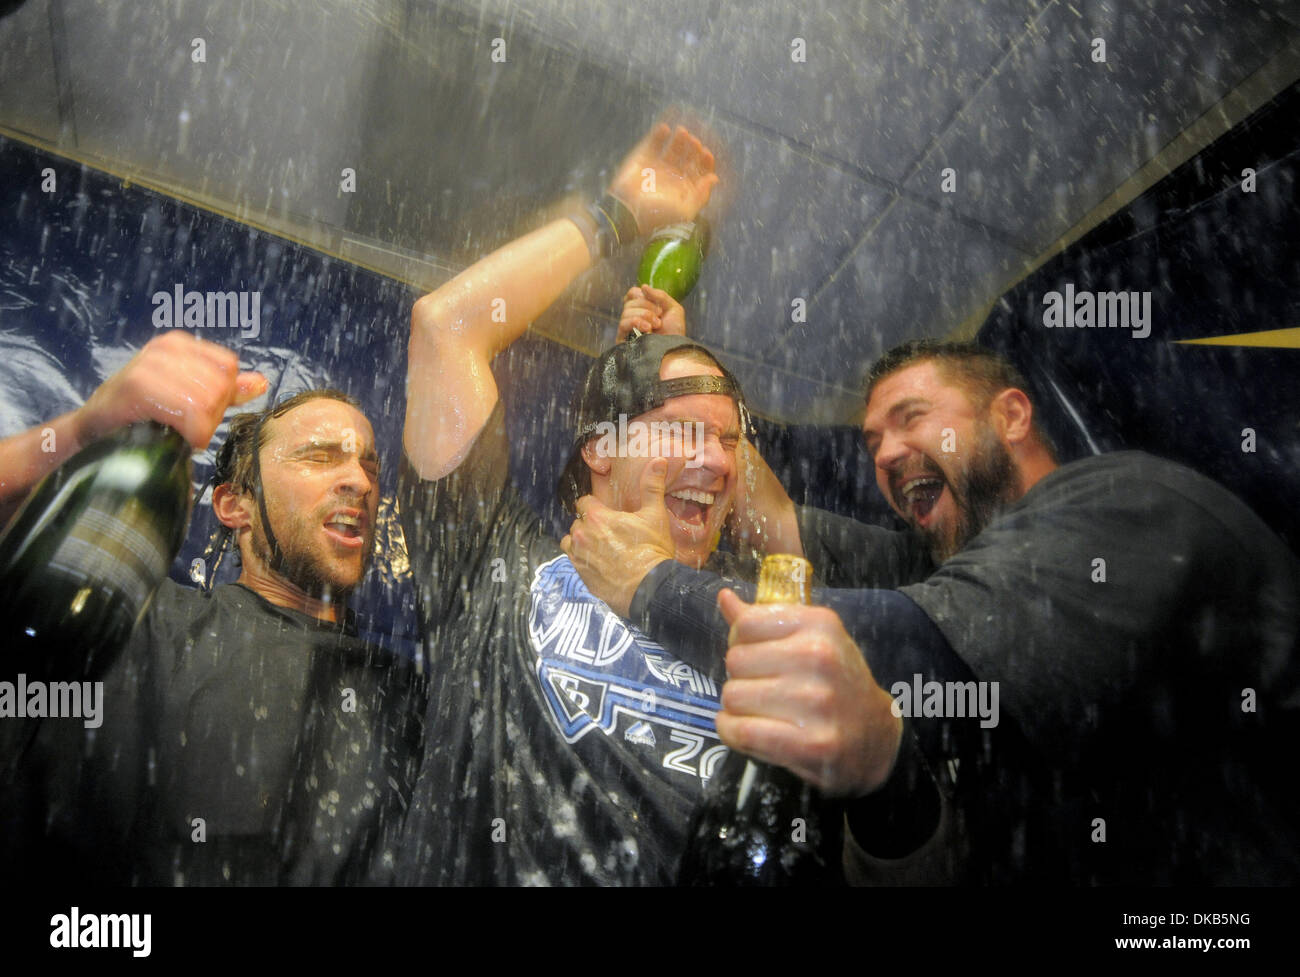 Sep. 29, 2011 - St. Petersburg, Florida, USA.Tampa Bay Rays' Evan Longoria (C) celebrates with teammates Sam Fuld (L) and Kelly Shoppach (R) in the clubhouse following his 12th inning home run to beat the New York Yankees 8-7 and secure the American League wild card during a Major League Baseball game in St. Petersburg, Florida, USA  29 September 2011. (Credit Image: Brian Blanco/Z Stock Photo